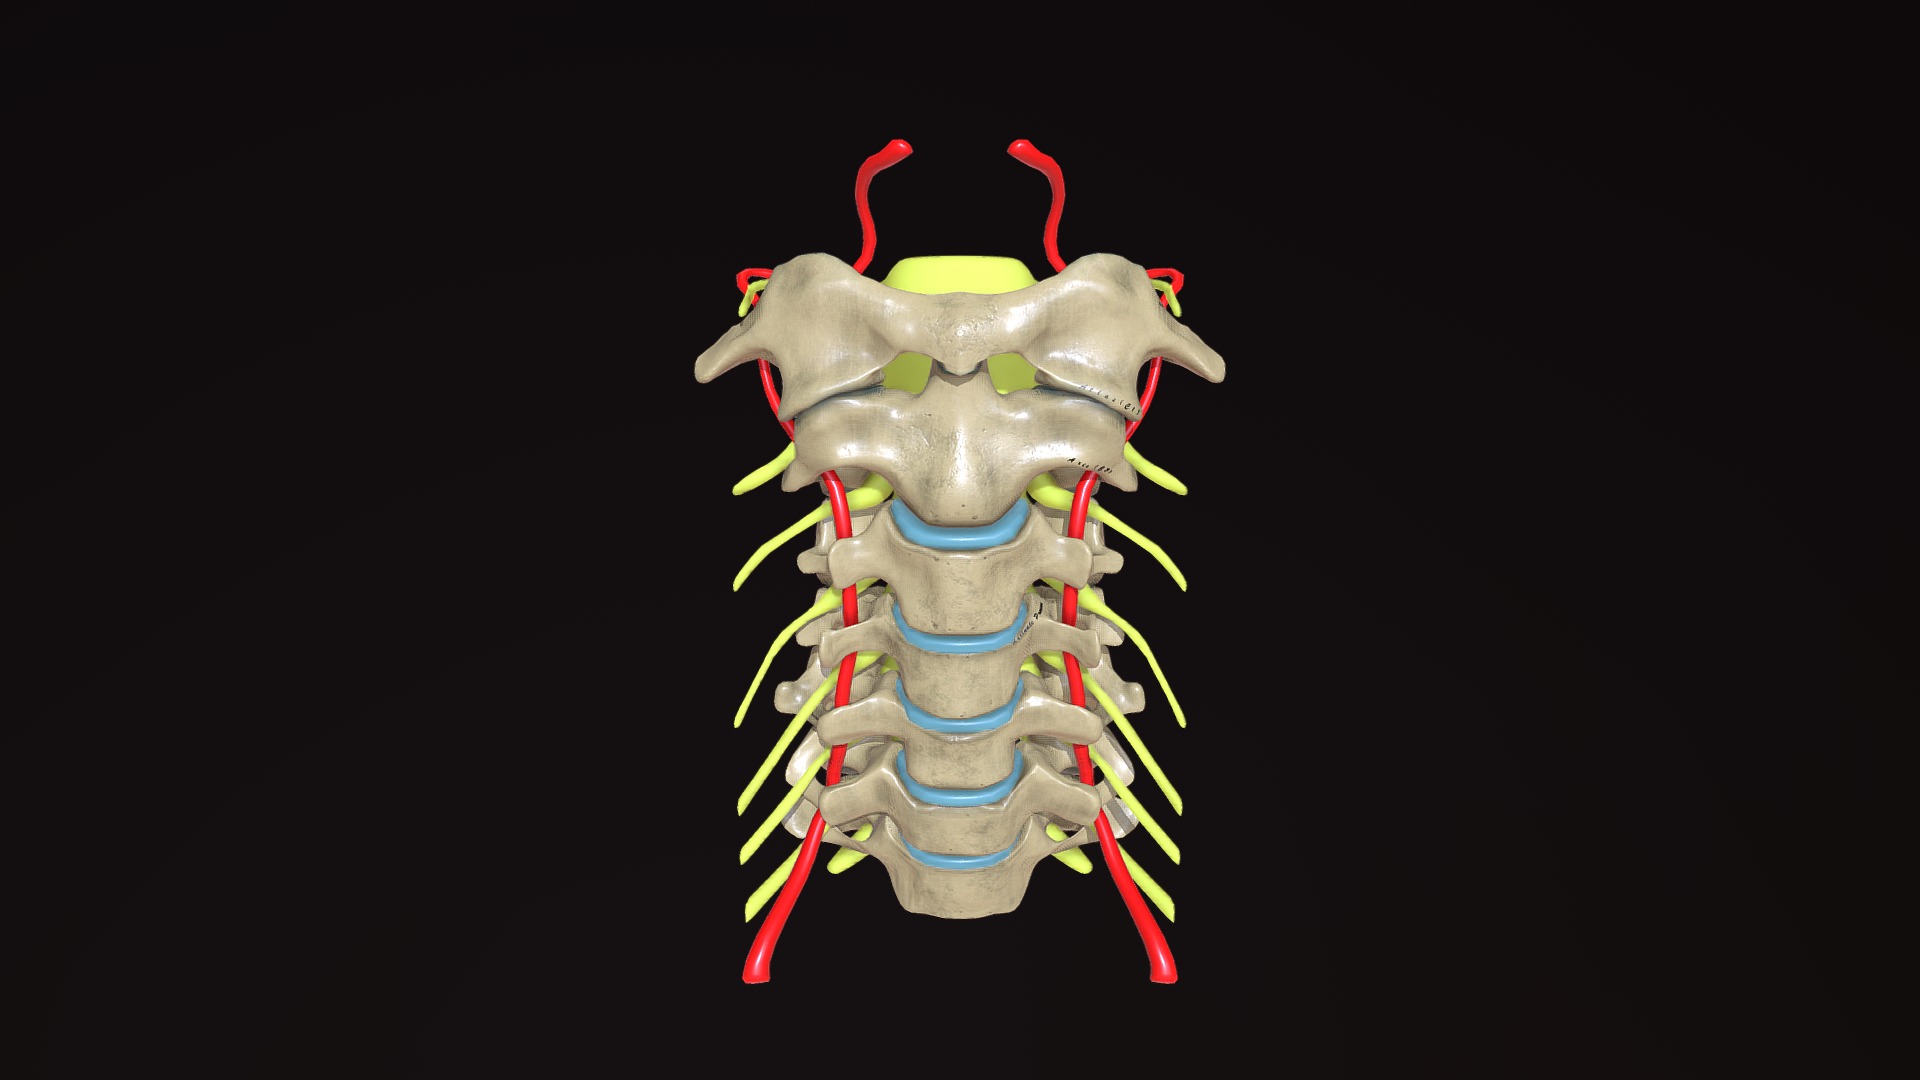 3D model Cervical Spine – Labelled - This is a 3D model of the Cervical Spine - Labelled. The 3D model is about a green and red robot.